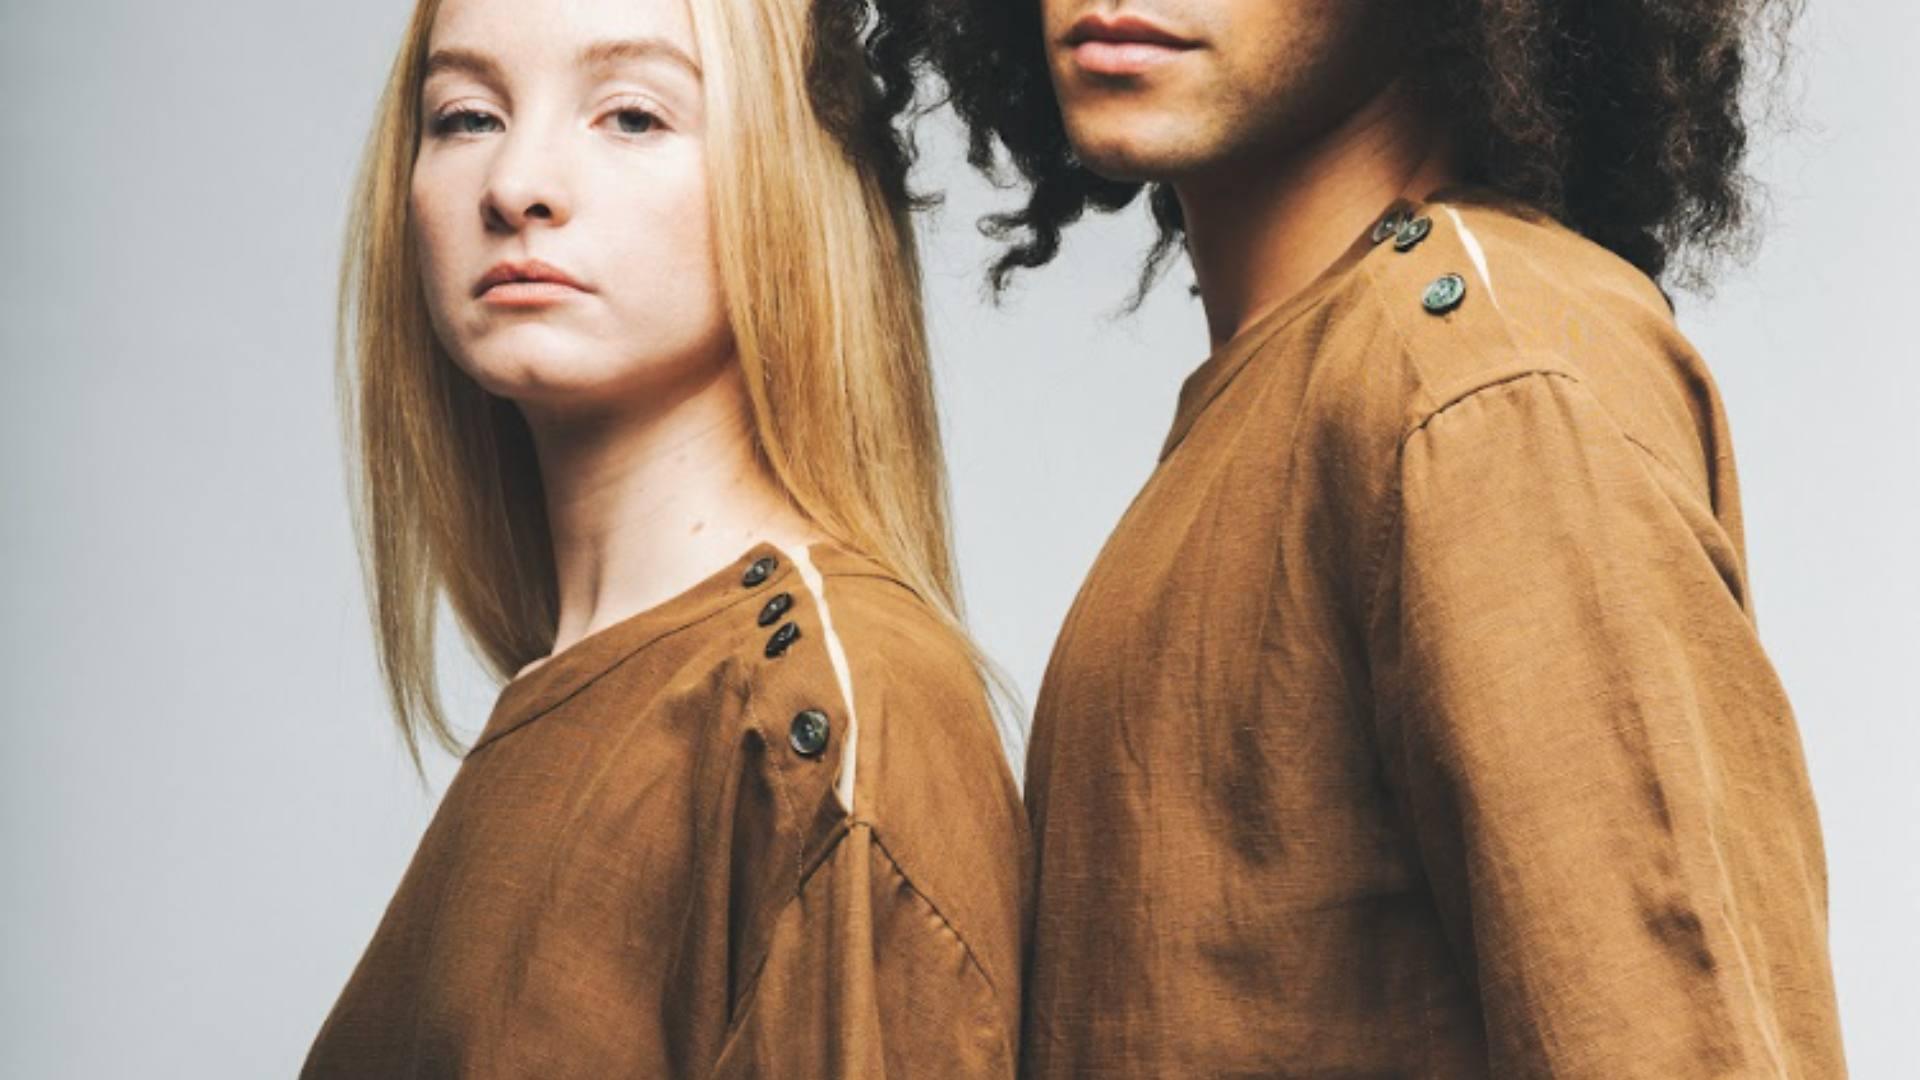 Two people stand together wearing sustainable brown tops.